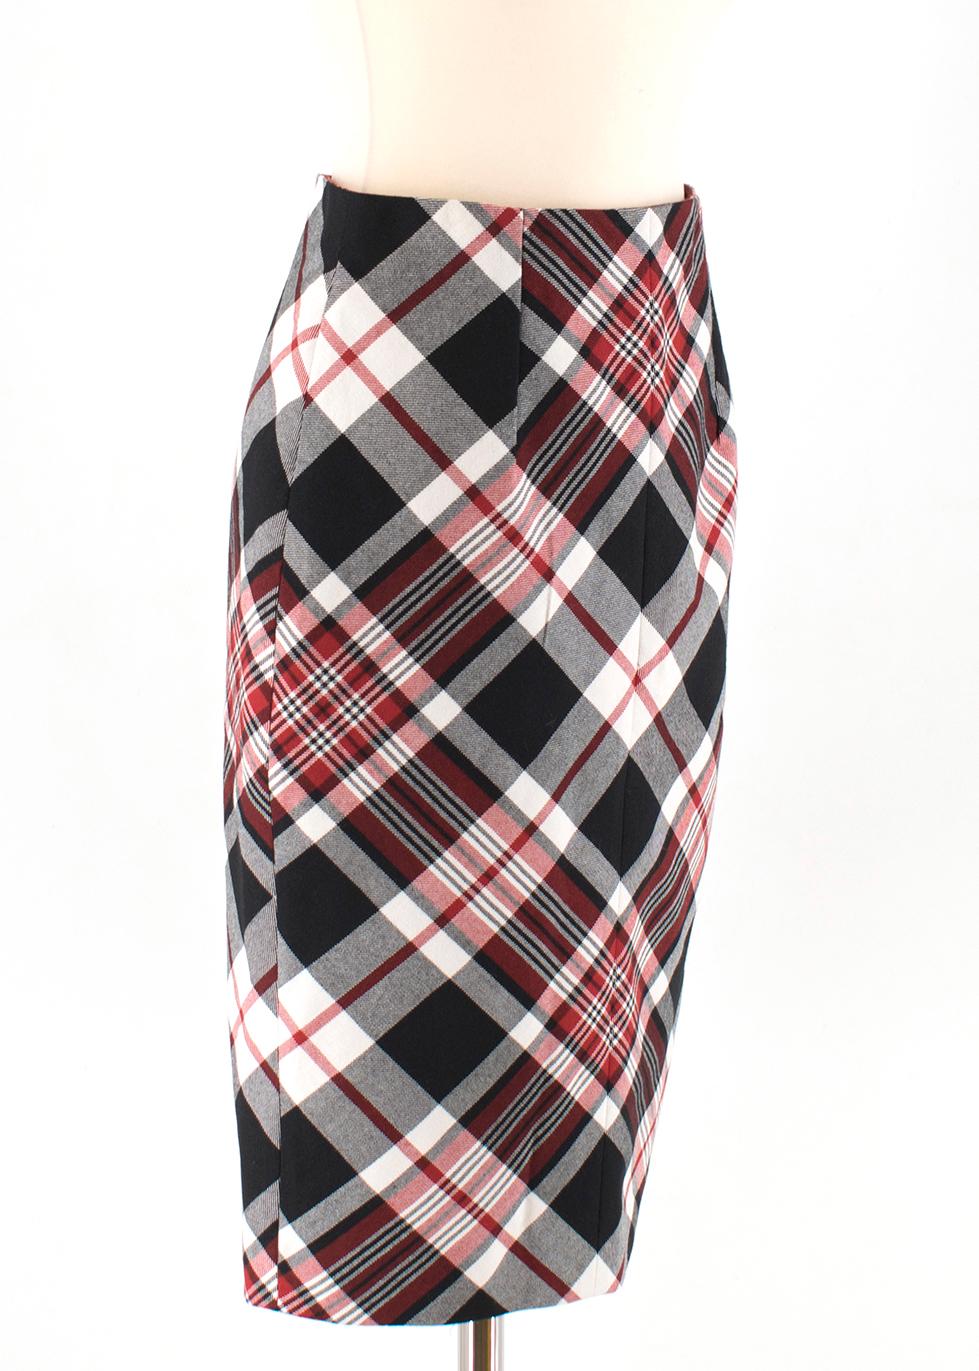 Alexander McQueen Tartan Wool Pencil Skirt

- Pencil shaped skirt
- Invisible zipper closure at the back
- Vent at the bottom back
- 100% Wool
- Fully Lined

Please note, these items are pre-owned and may show signs of being stored even when unworn